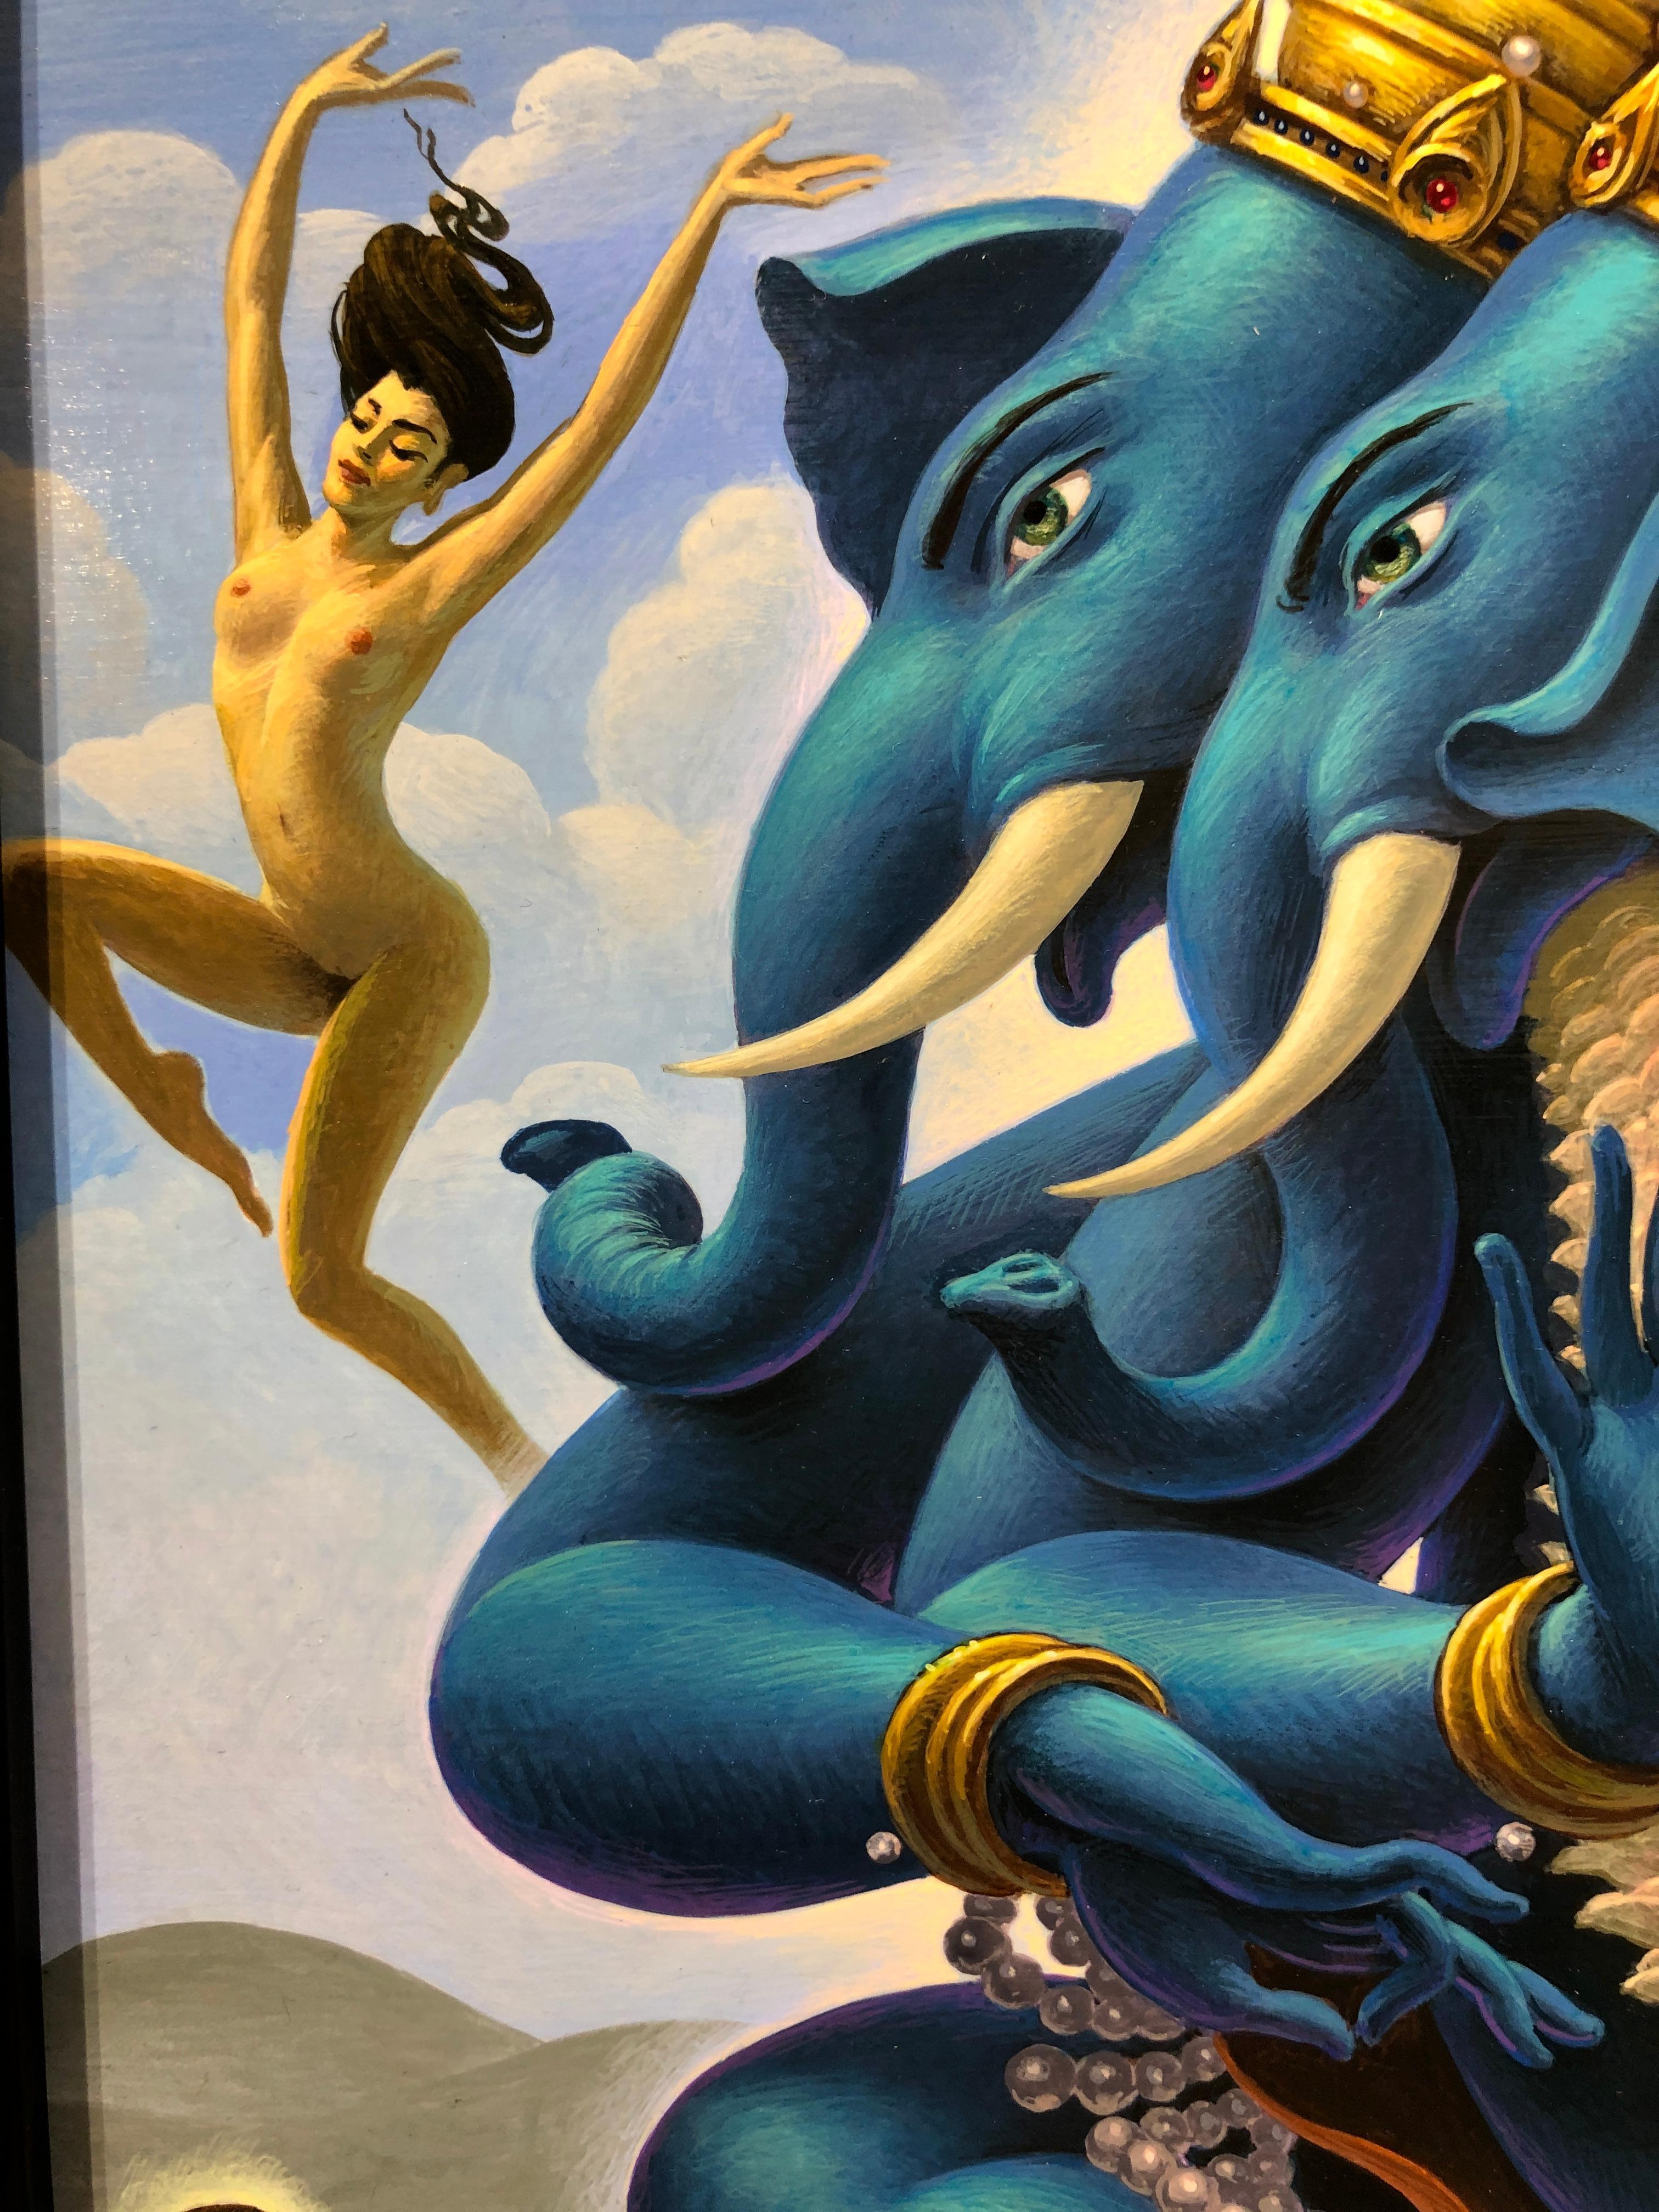 Ganesh at the Maelstrom - Highly Detailed Surreal, Symbolic Painting 7